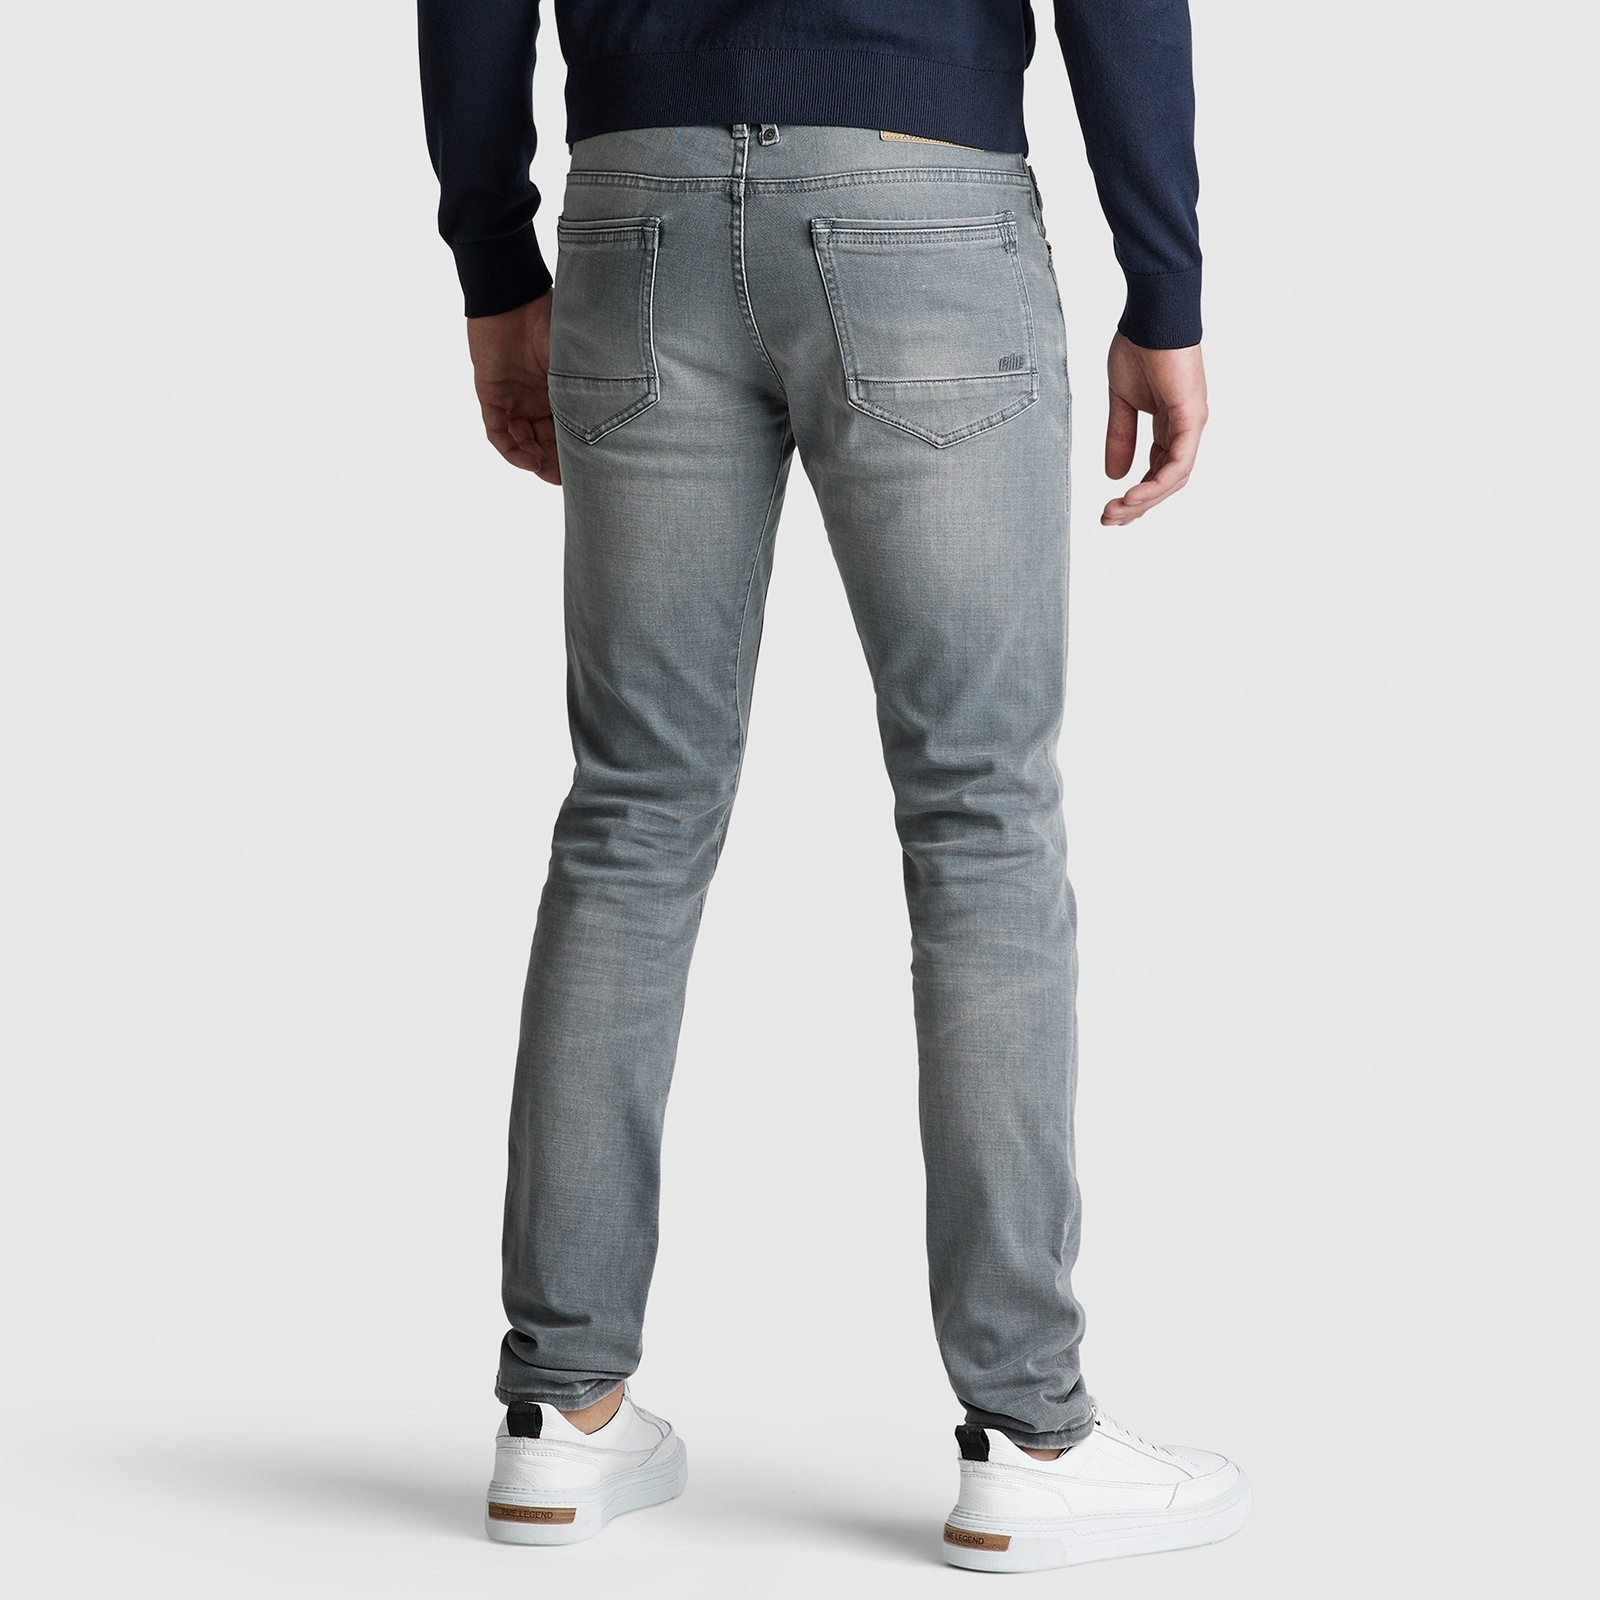 PME LEGEND TAILWHEEL JEANS - KING Jeans & Casuals